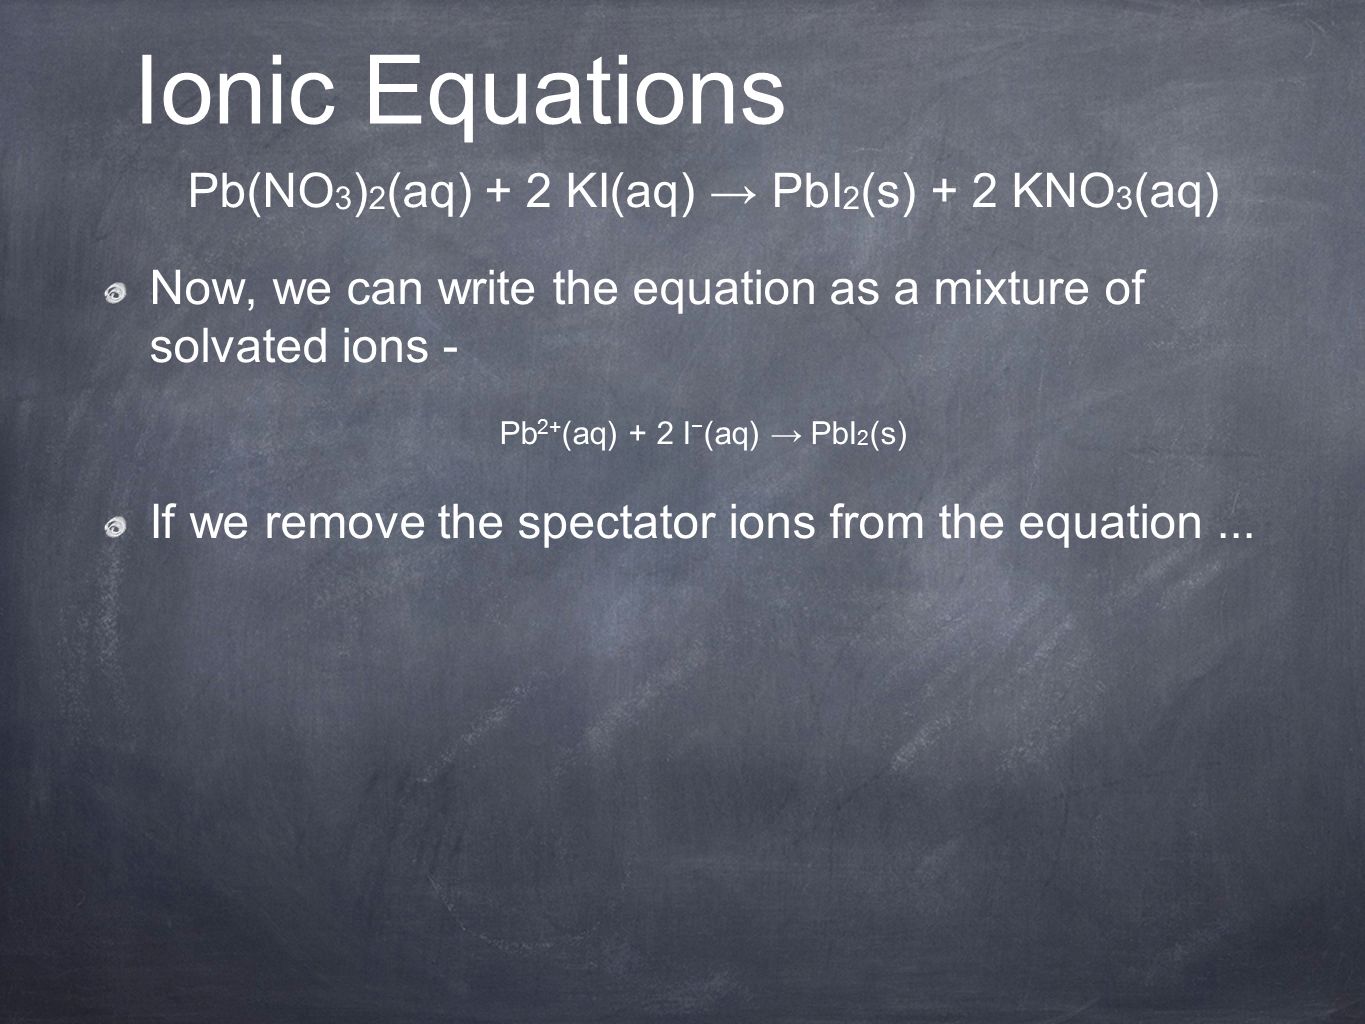 Pb(NO 3 ) 2 (aq) + 2 KI(aq) → PbI 2 (s) + 2 KNO 3 (aq) Now, we can write the equation as a mixture of solvated ions - Pb 2+ (aq) + 2 I − (aq) → PbI 2 (s) If we remove the spectator ions from the equation...